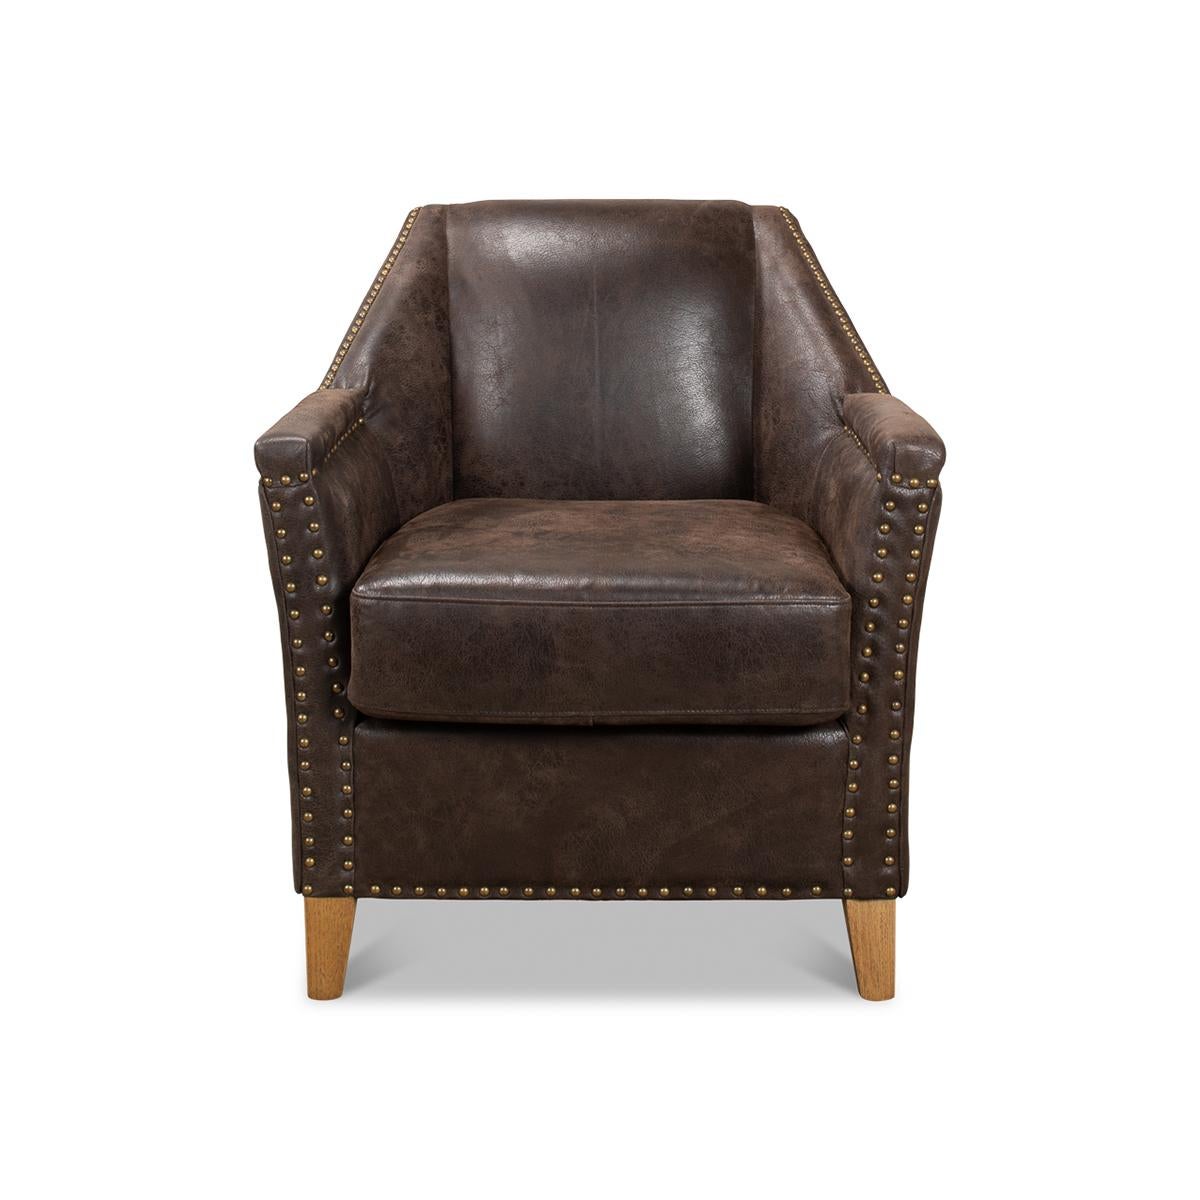 Eclectic Modern leather armchair with a coffee finish antiqued leather, with a+America oak legs and large nailhead trim details.

Dimensions: 28